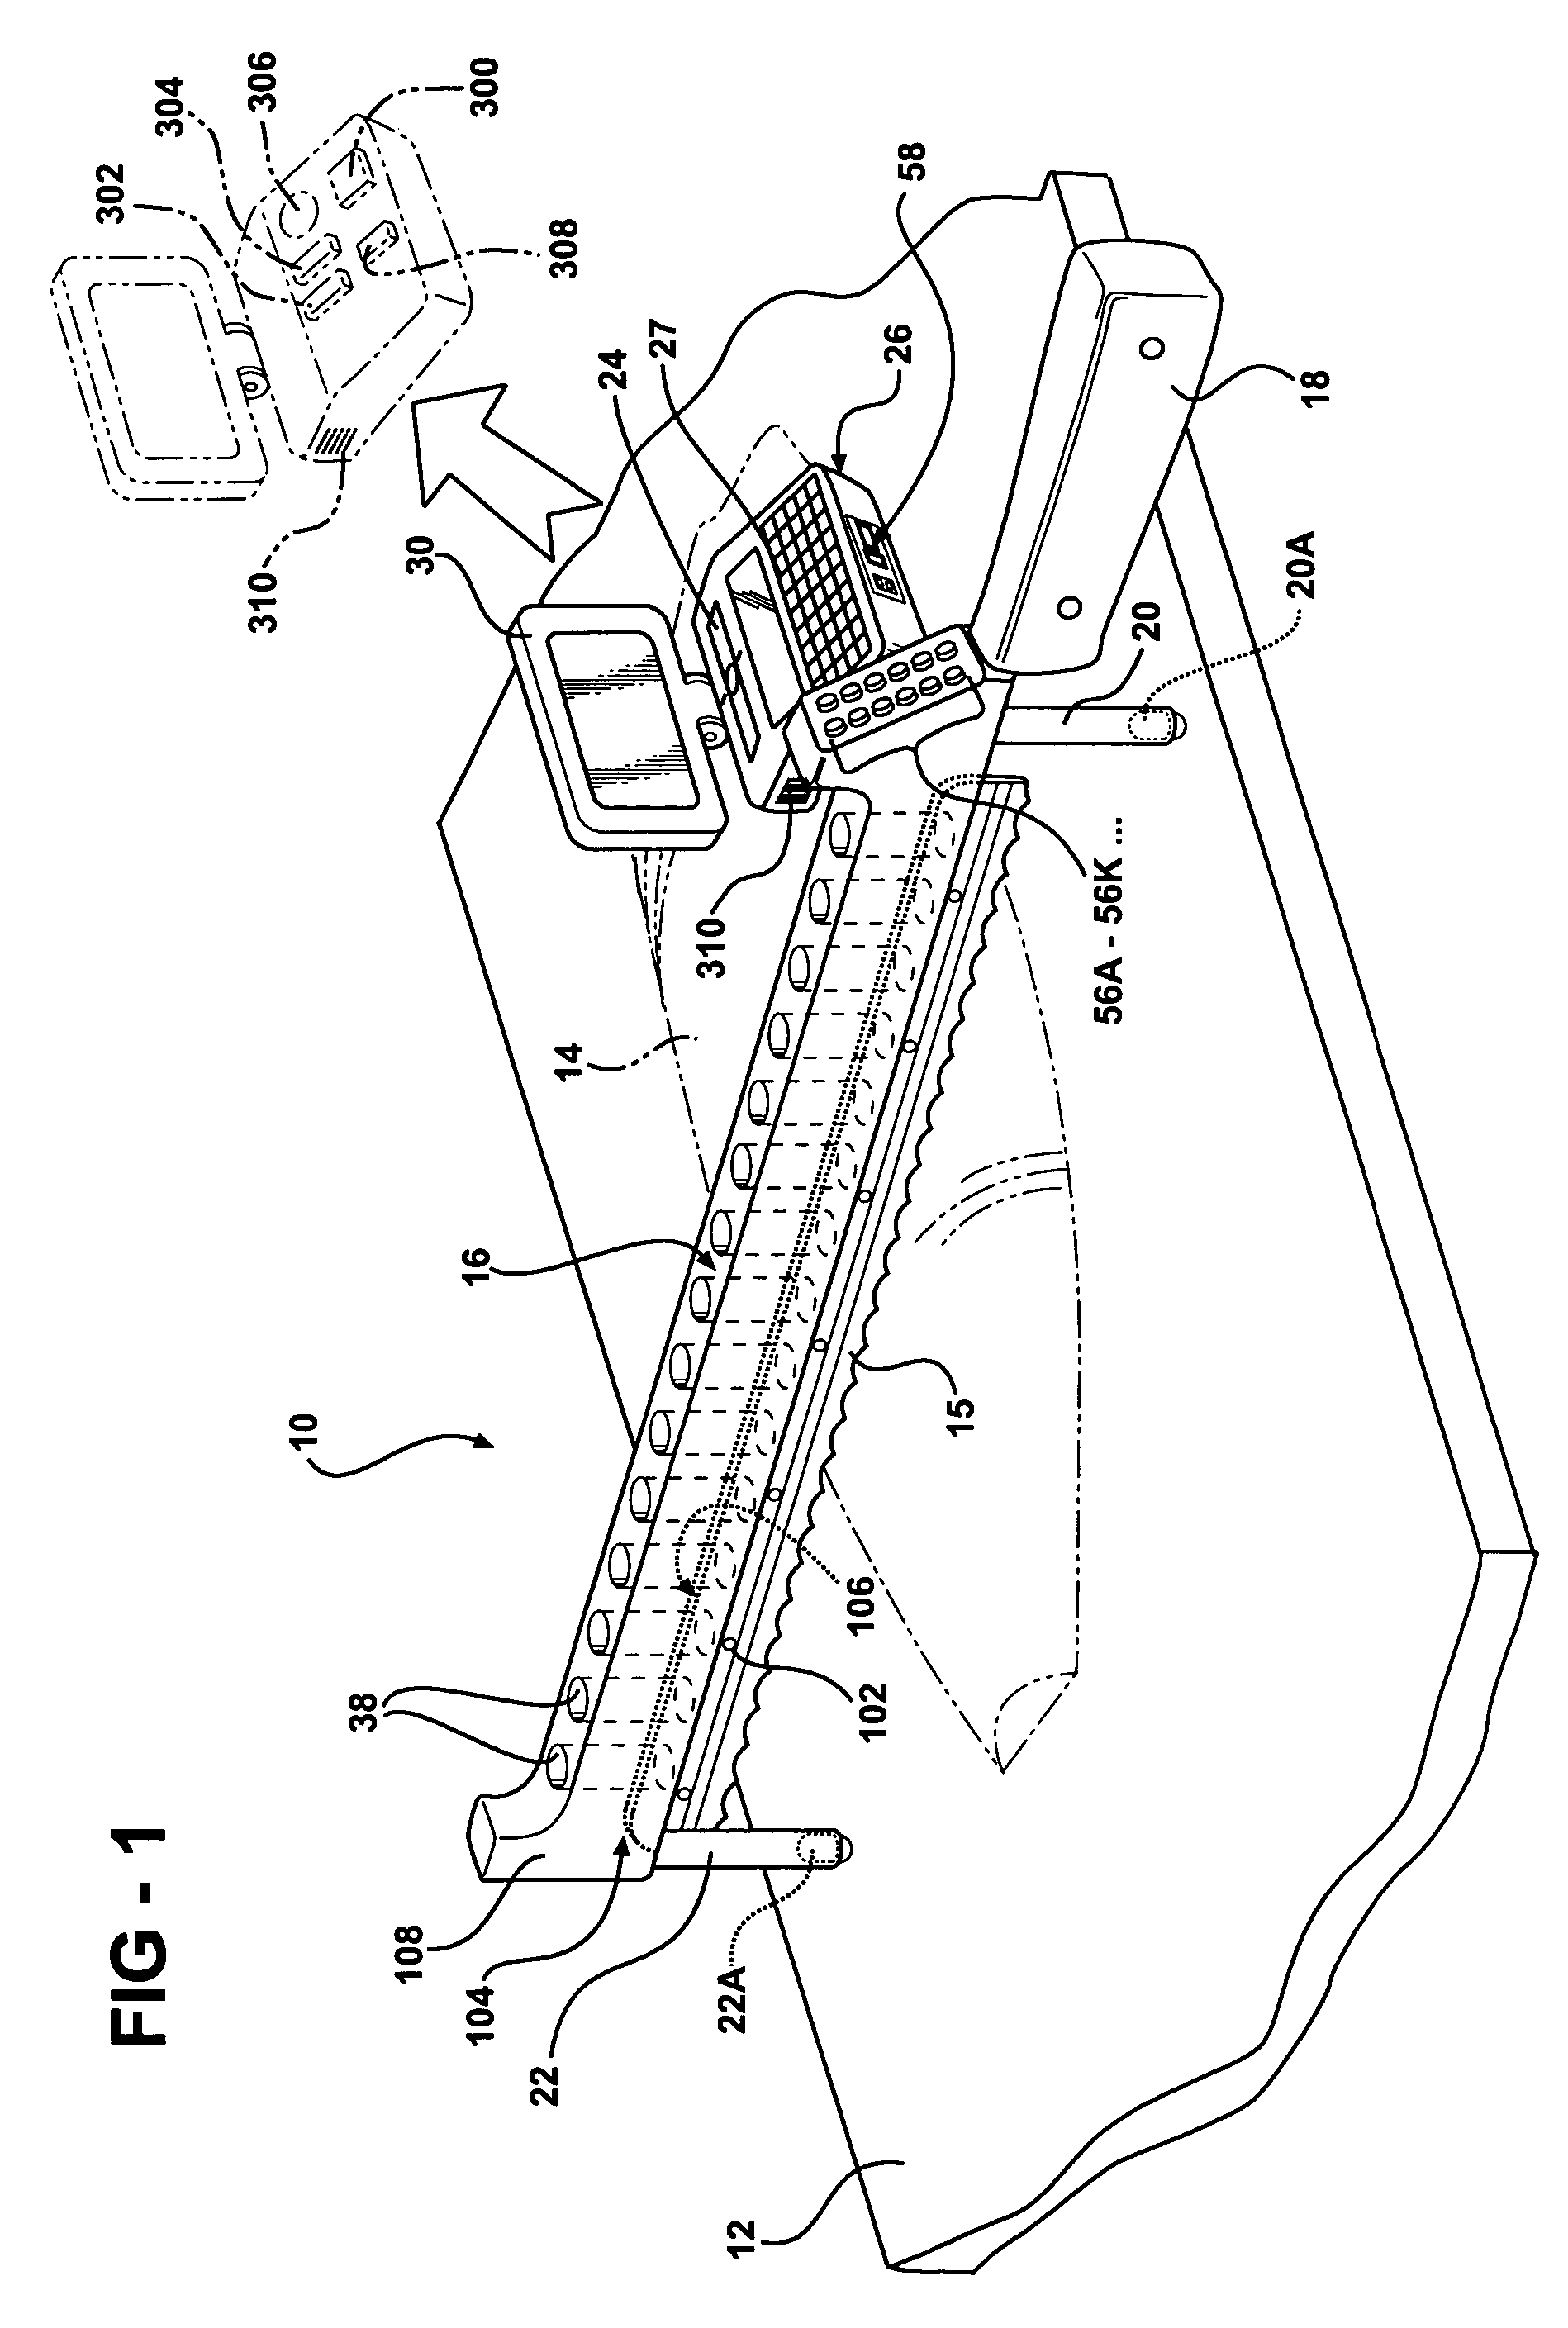 Apparatus and method for displaying numeric values corresponding to the volume of segments of an irregularly shaped item